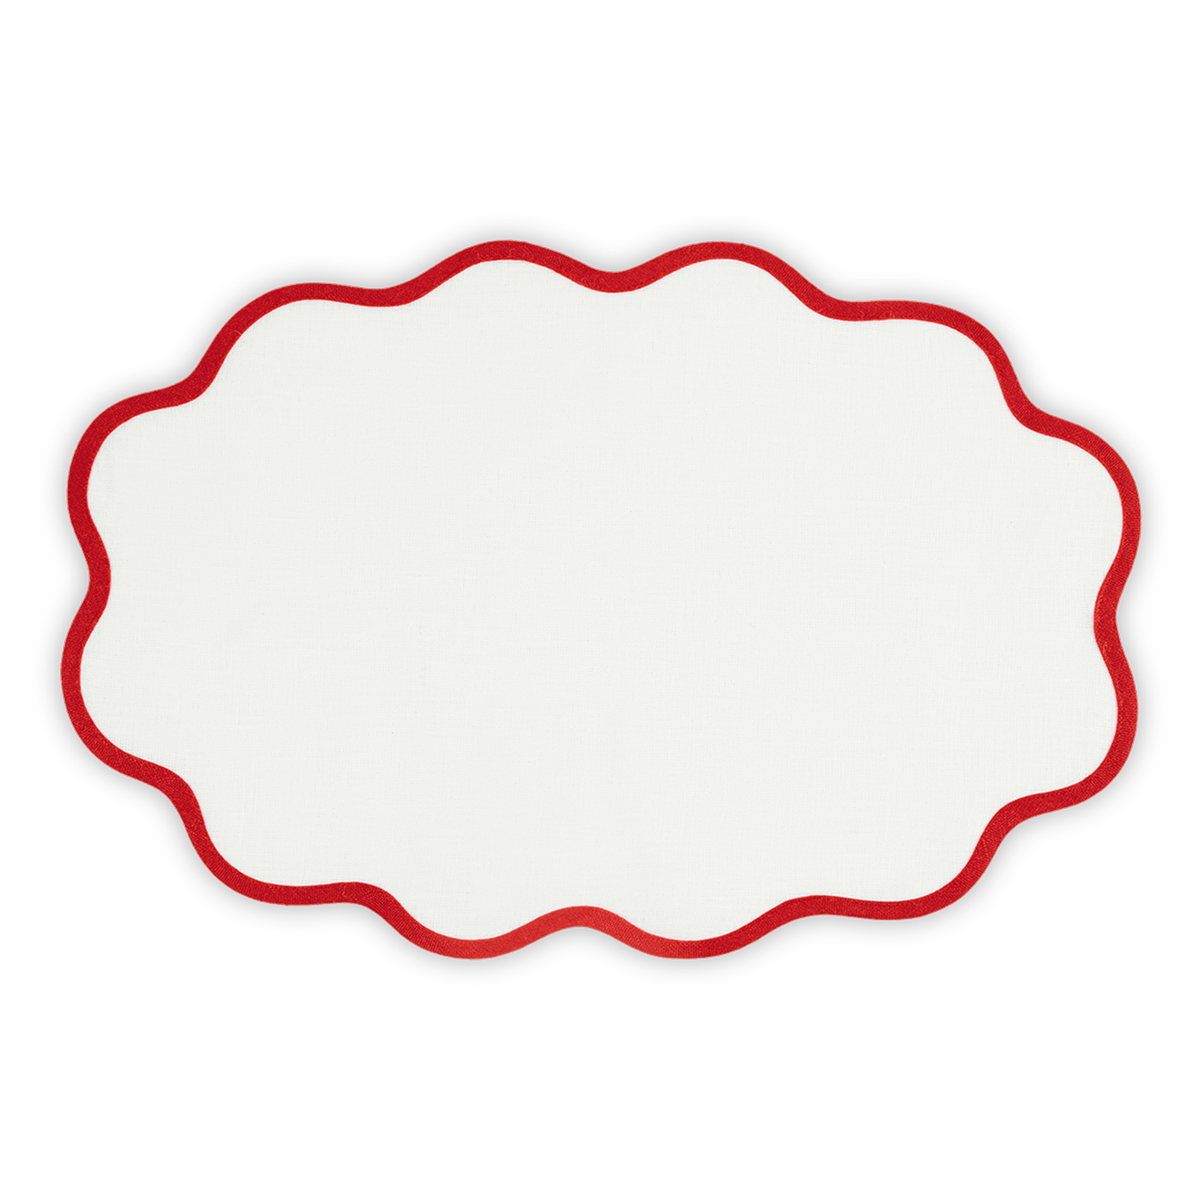 Oval Placemat of Matouk Scallop Edge Table Linens in Color Scarlet